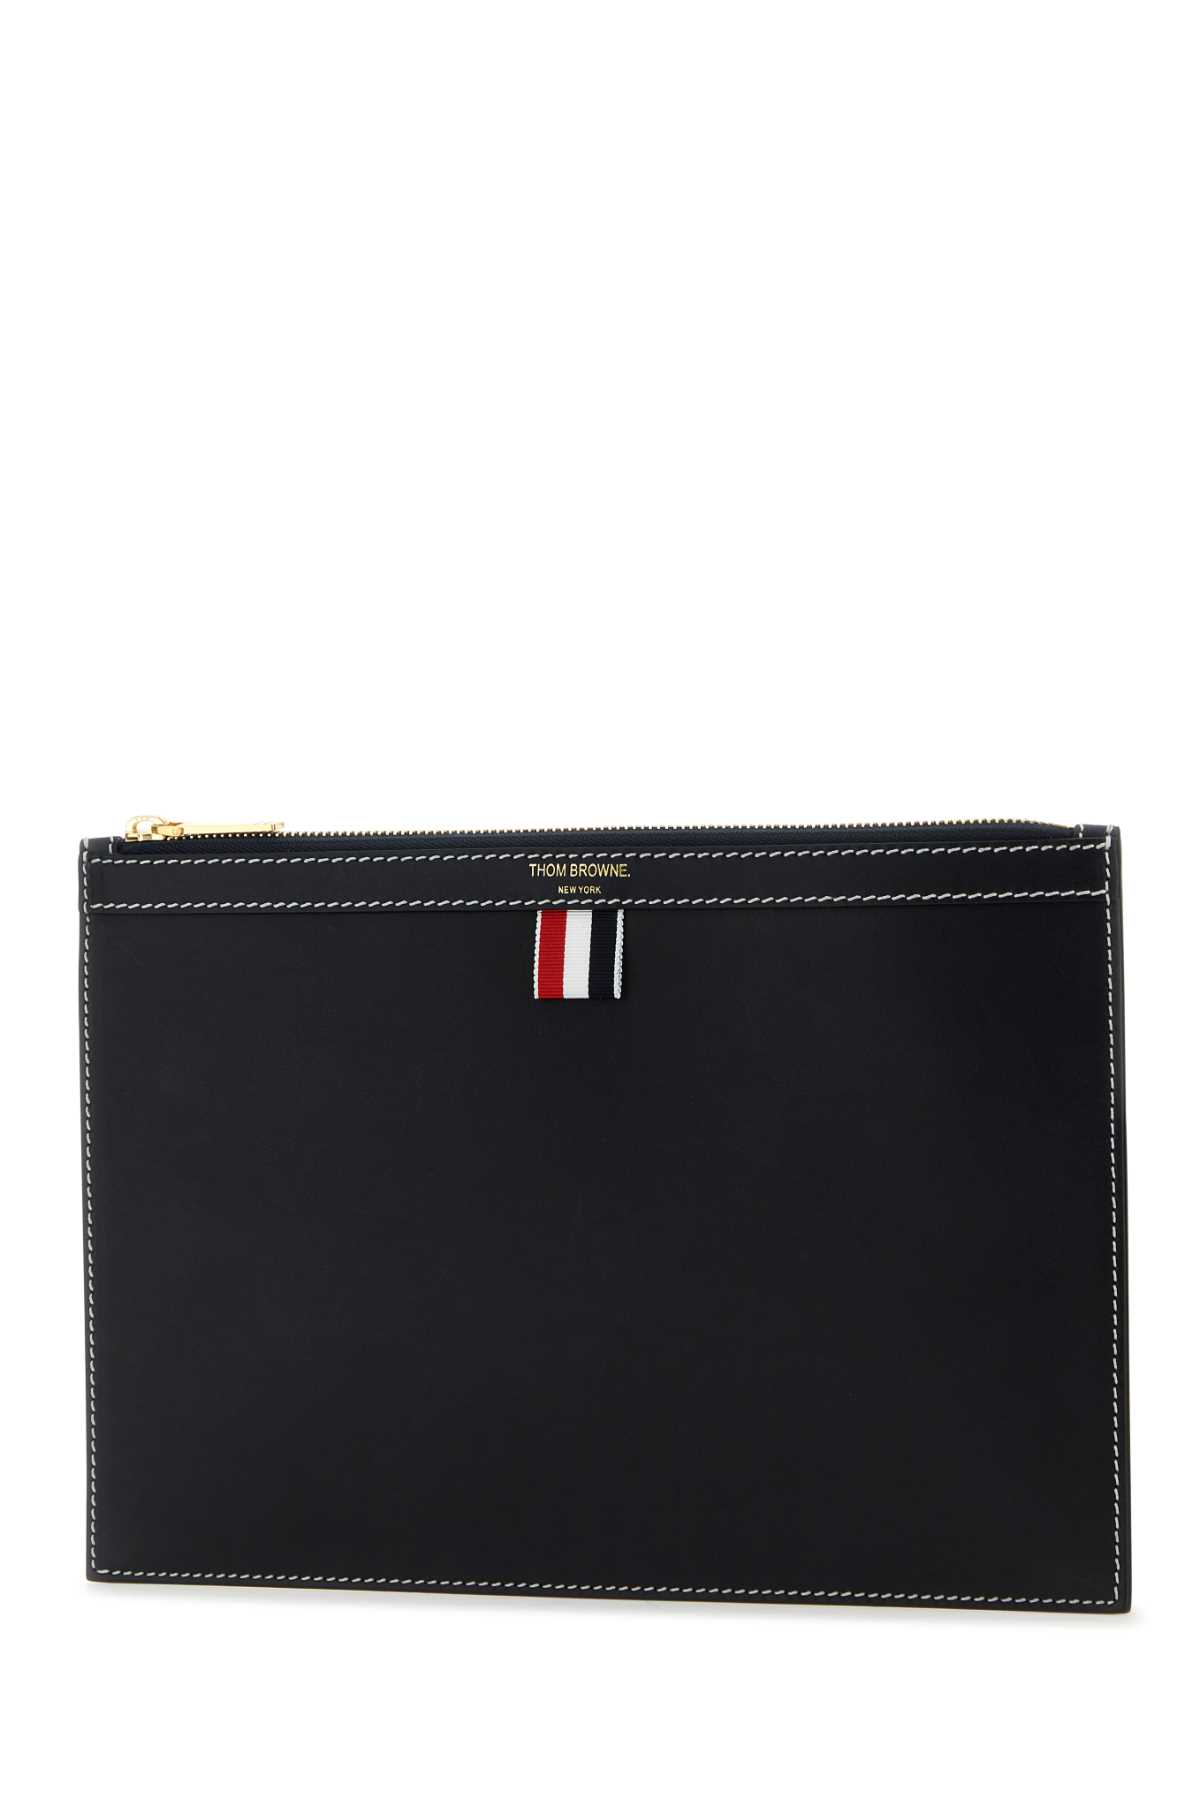 Thom Browne Midnight Blue Leather Document Case In Navy